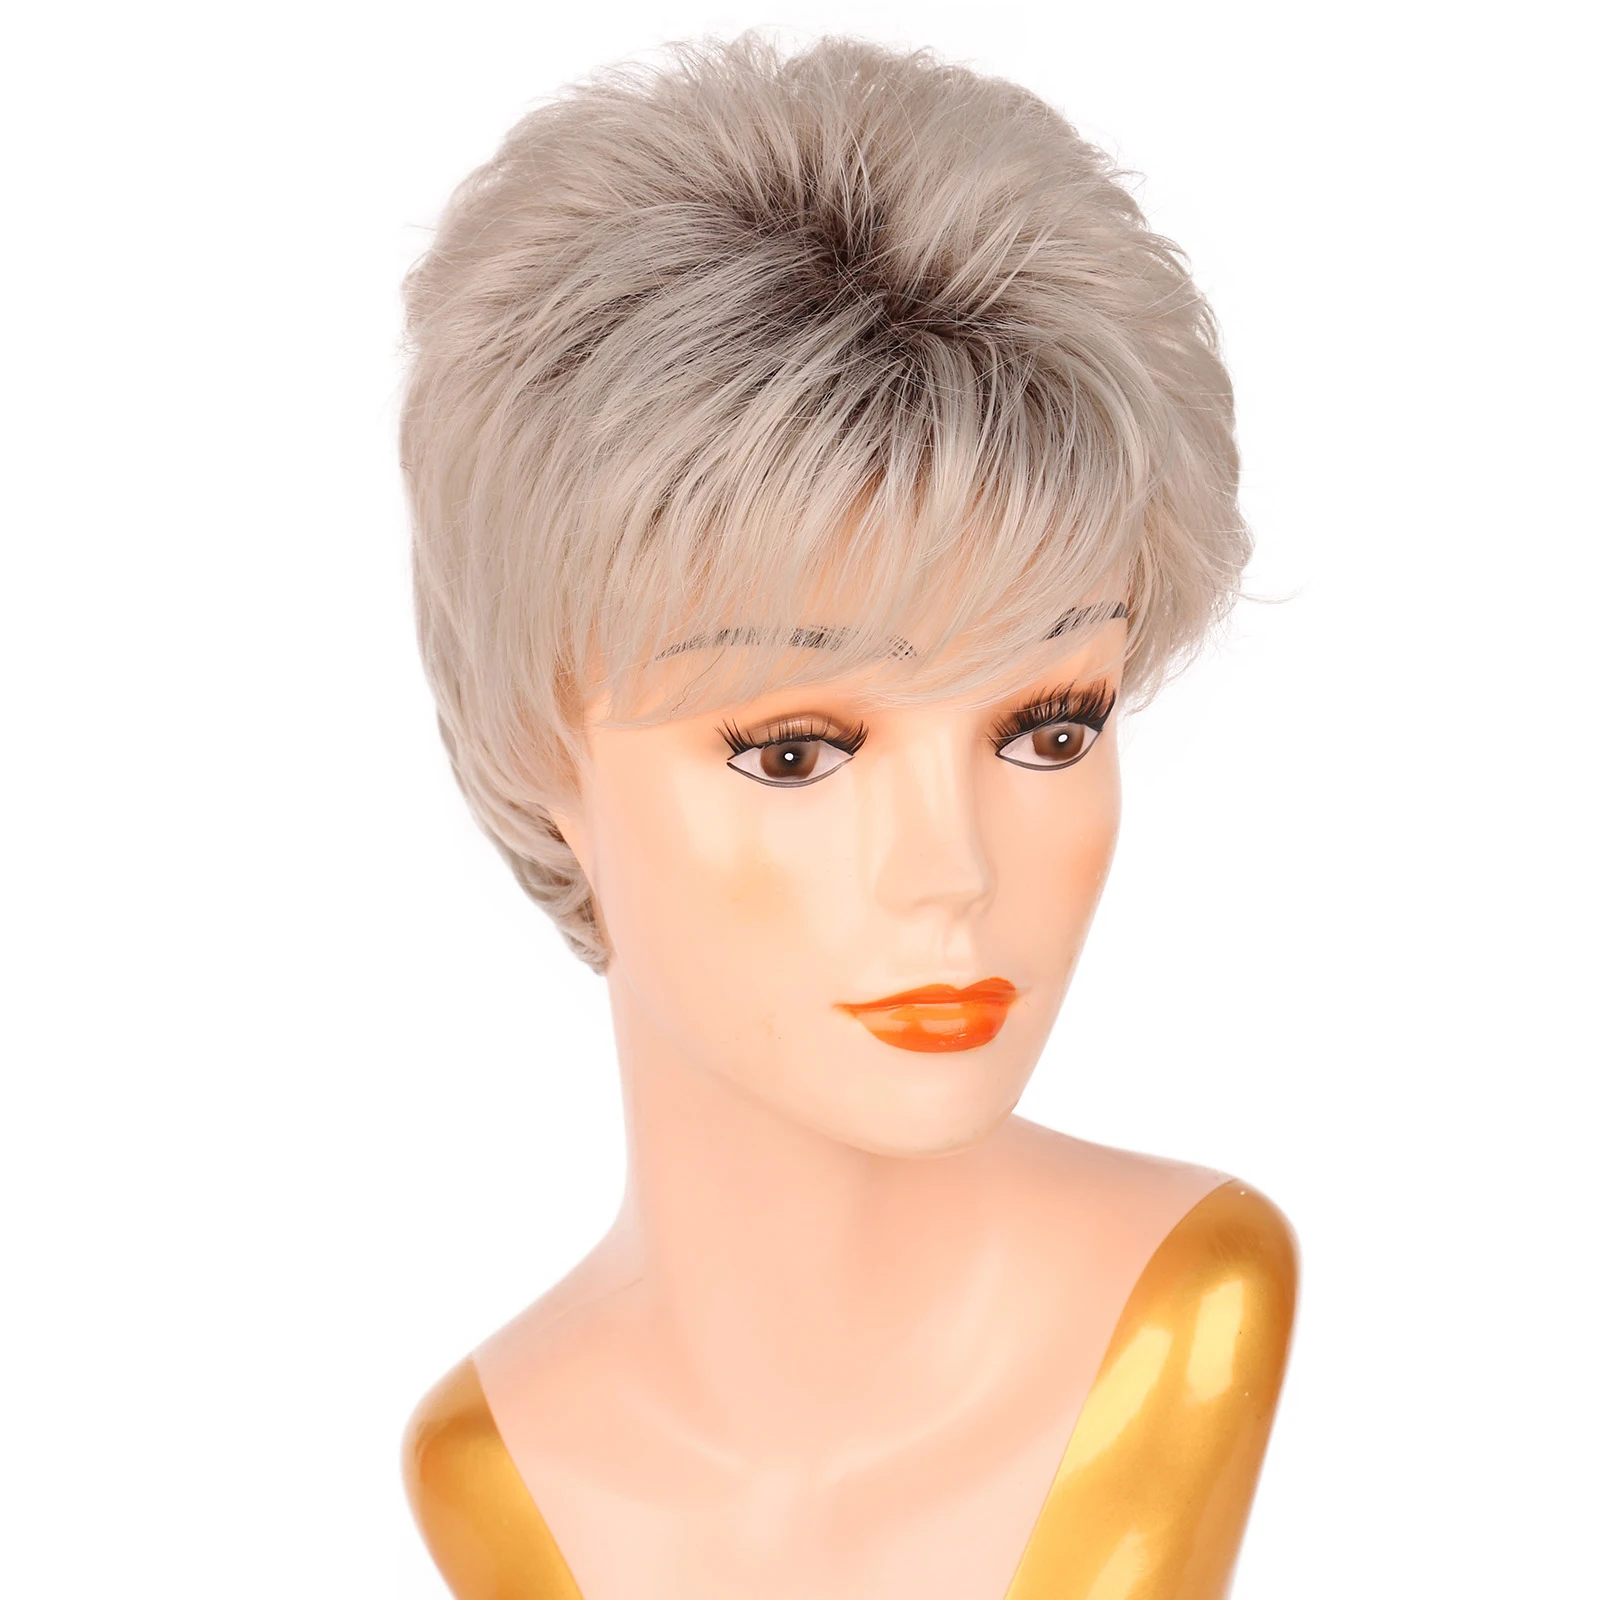 

BCHR Mix Brown And Blonde Pixie Cut Ombre Women's Wig Shaggy Layered Natural Short Straight Synthetic Hair Female Haircut